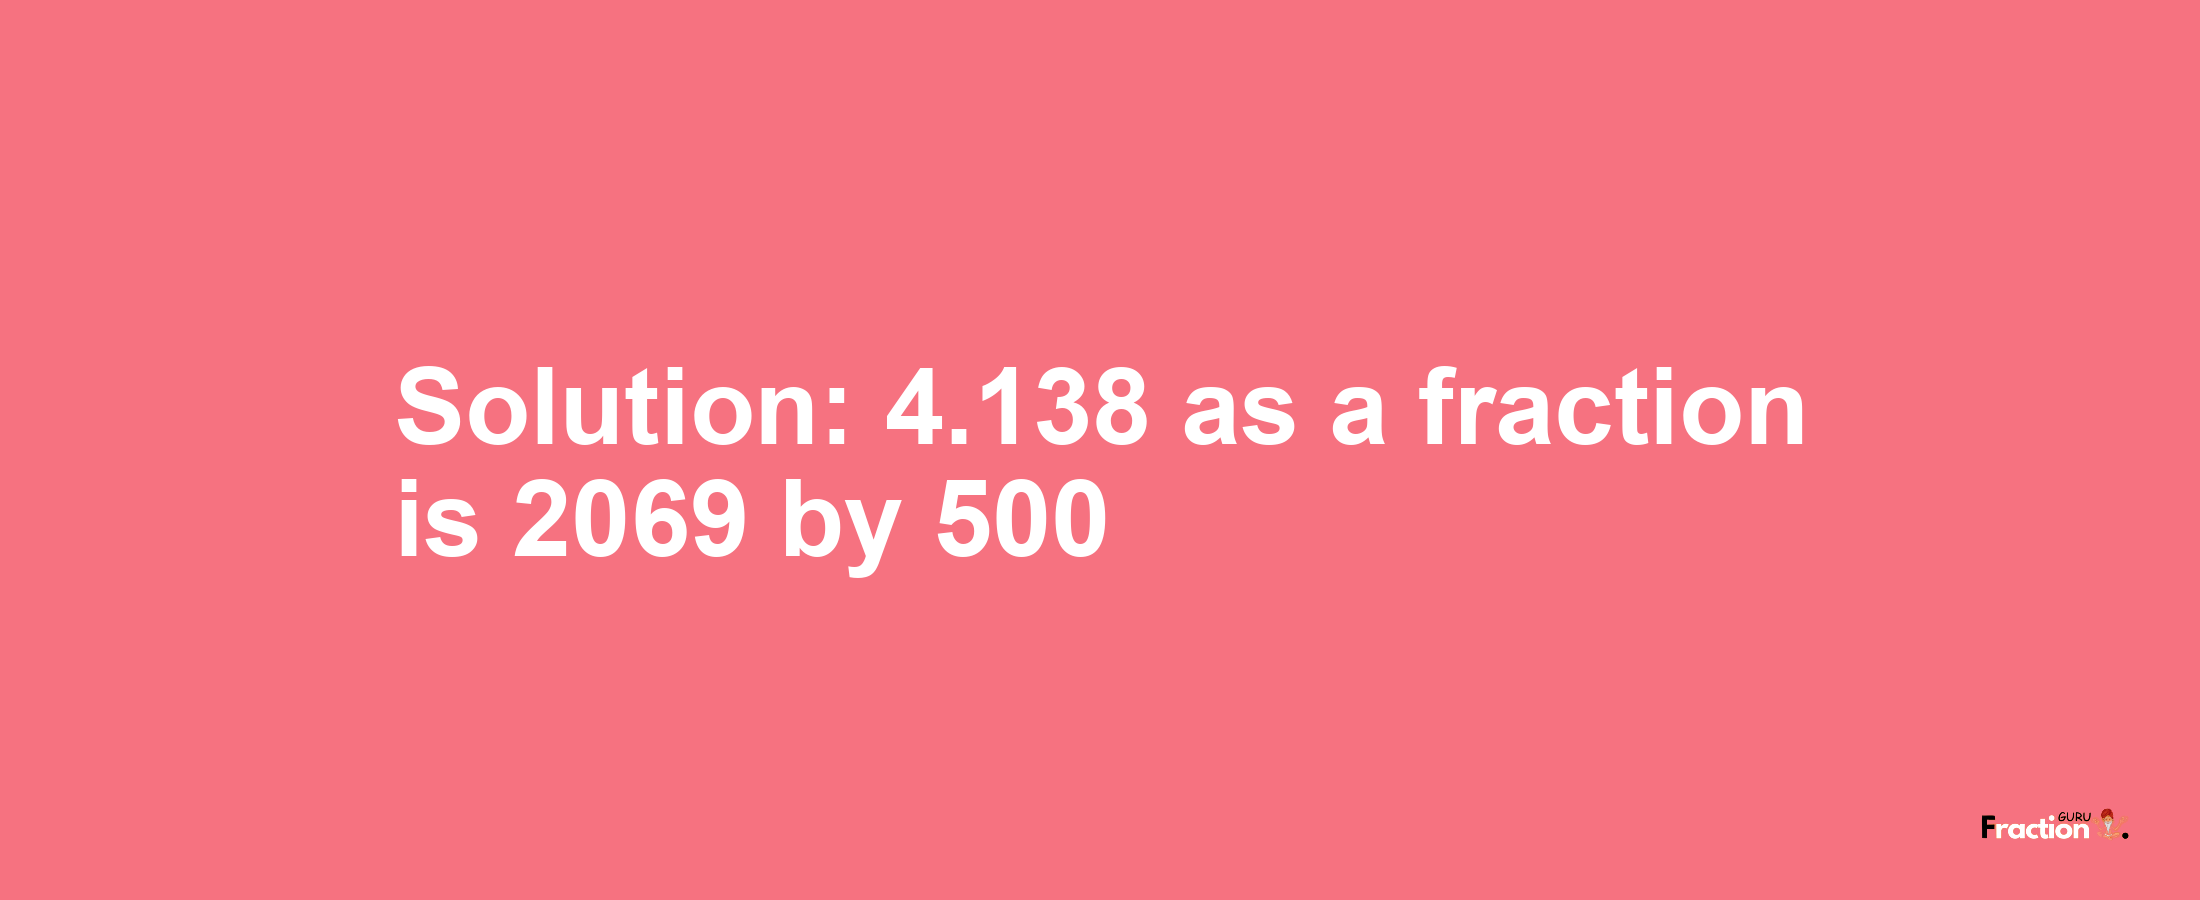 Solution:4.138 as a fraction is 2069/500